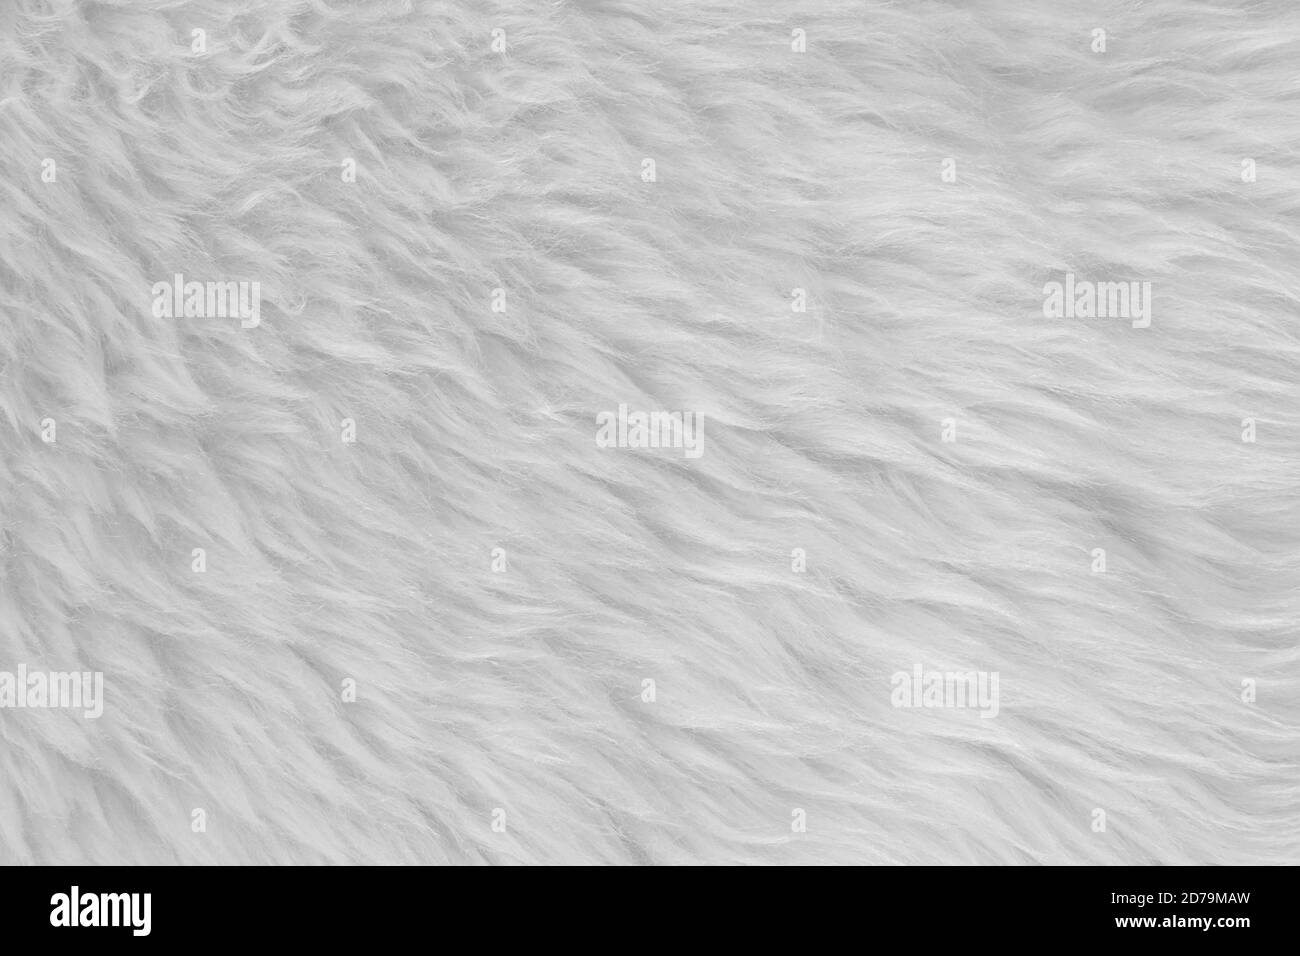 White real wool with beige top texture background. light cream natural sheep wool.  seamless plush cotton, texture of fluffy fur for designers Stock Photo